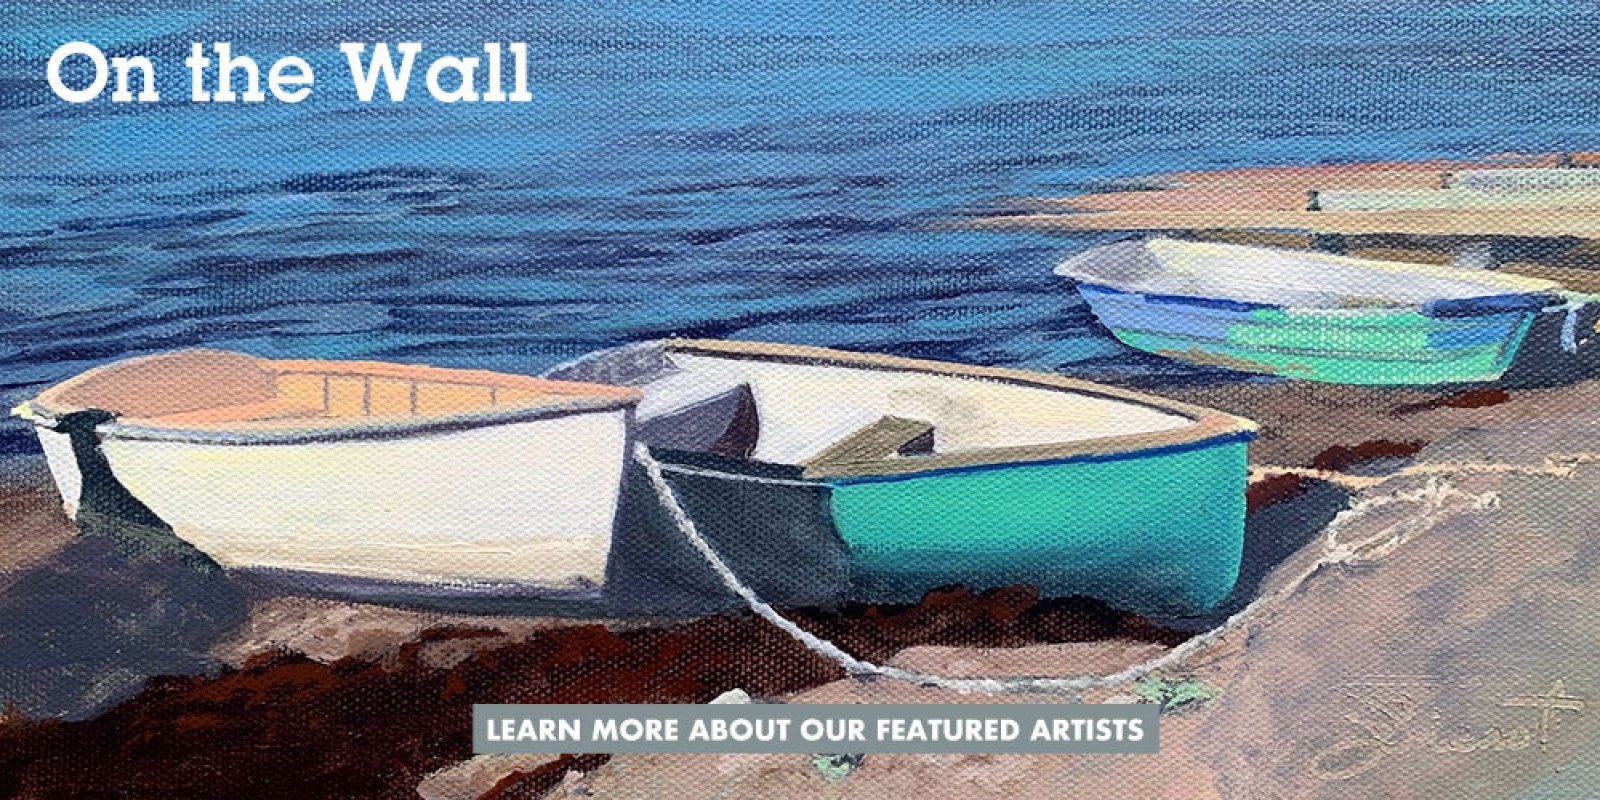 learn more about our featured artists